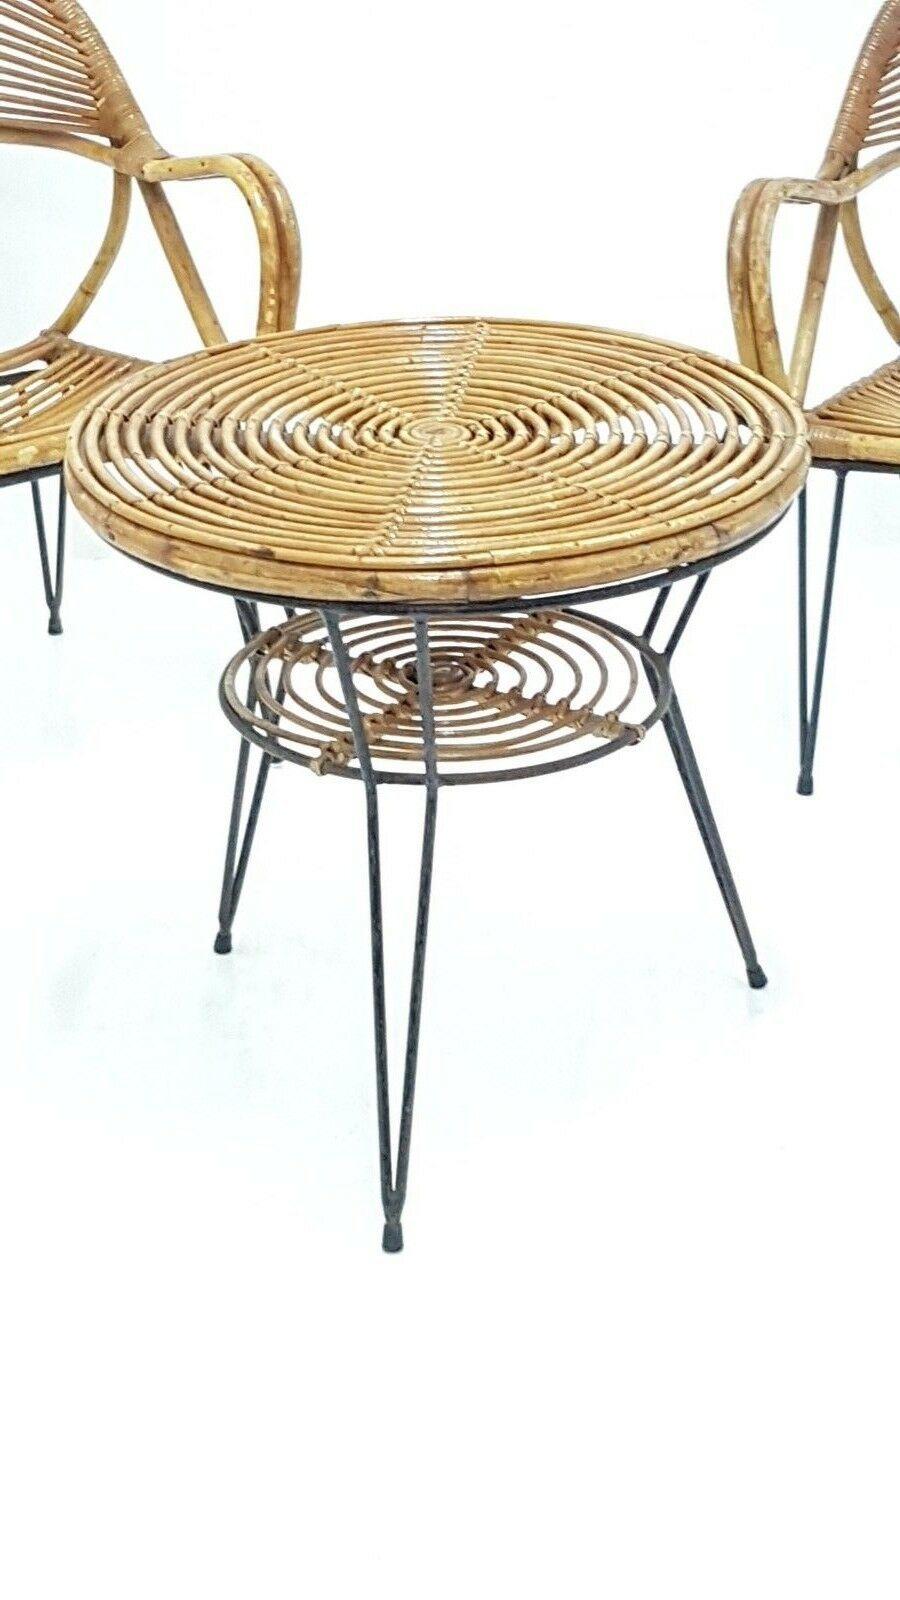 Mid-20th Century Lounge Chairs and Bamboo Table Design Janine Abraham & Dirk Jan Rol, 1950s For Sale